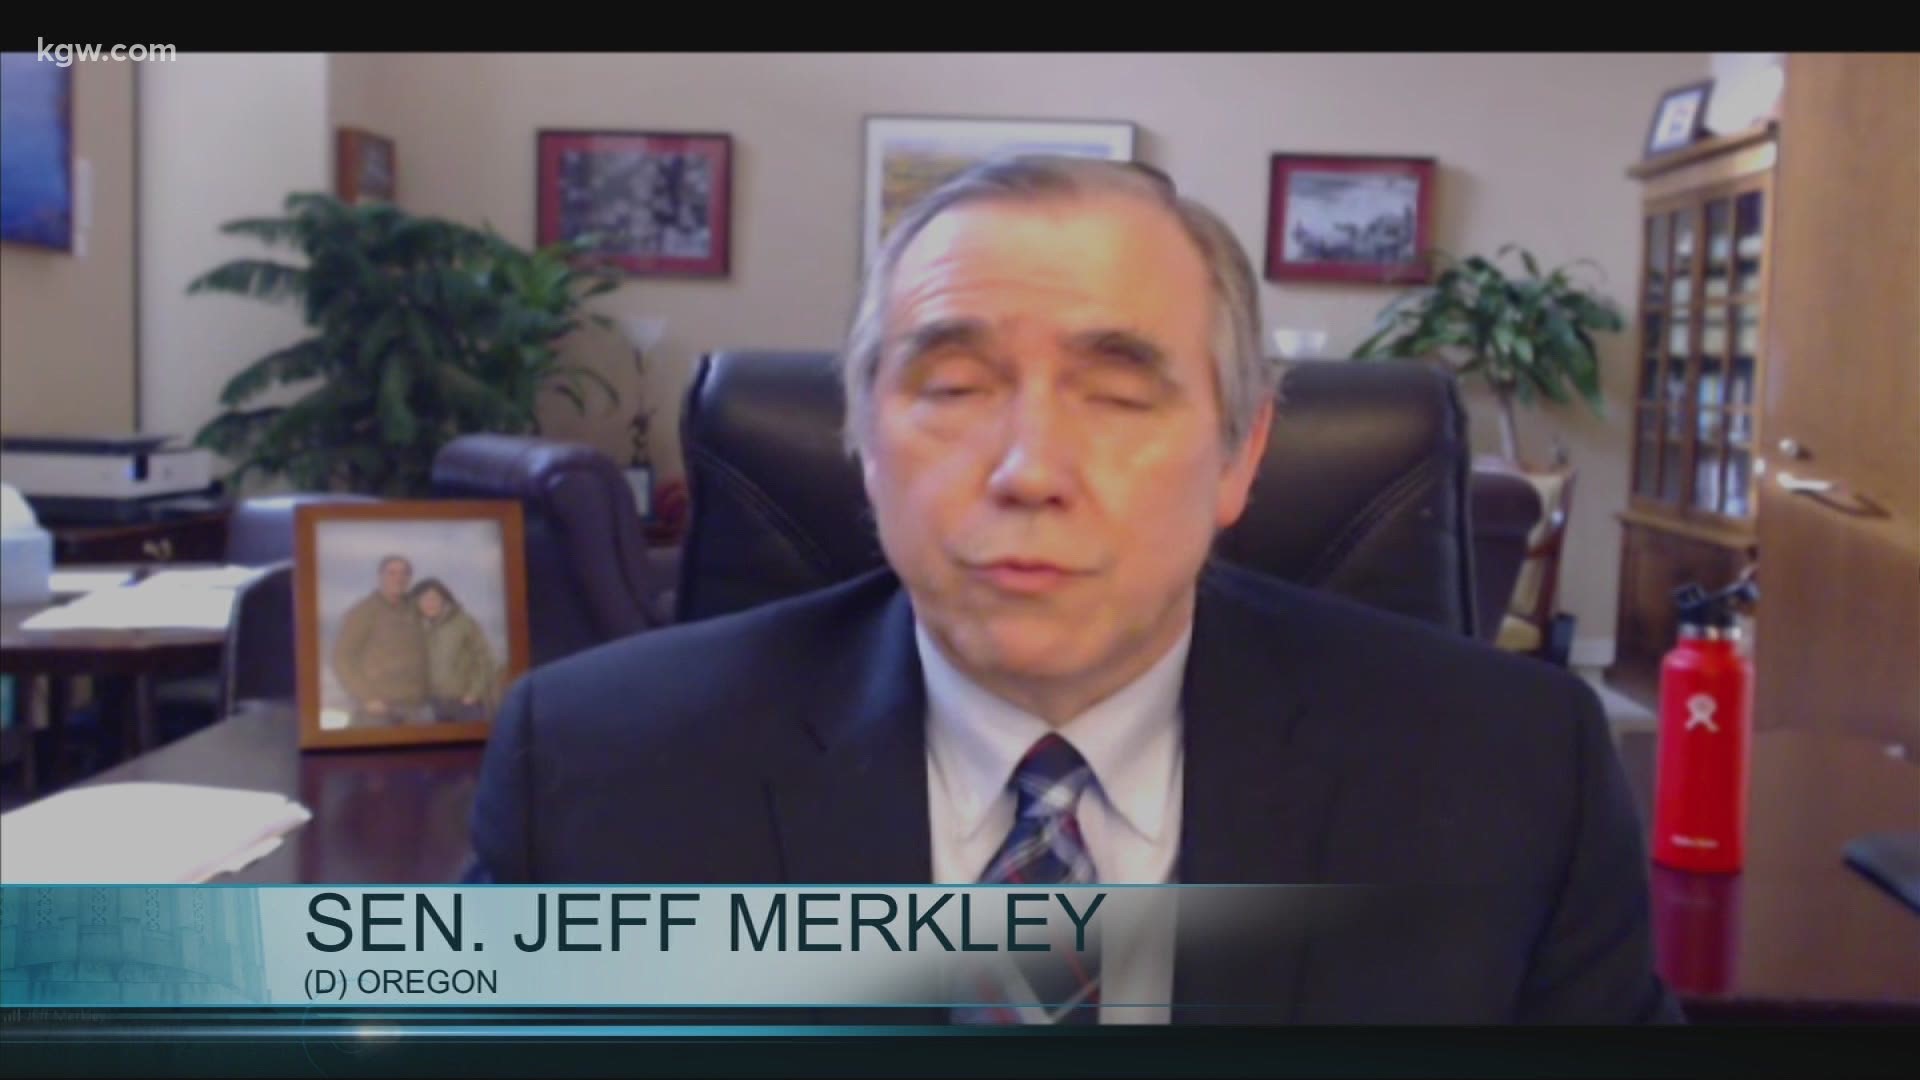 Oregon Sen. Jeff Merkley is proposing a bill that would create a national database to keep track of police misconduct.